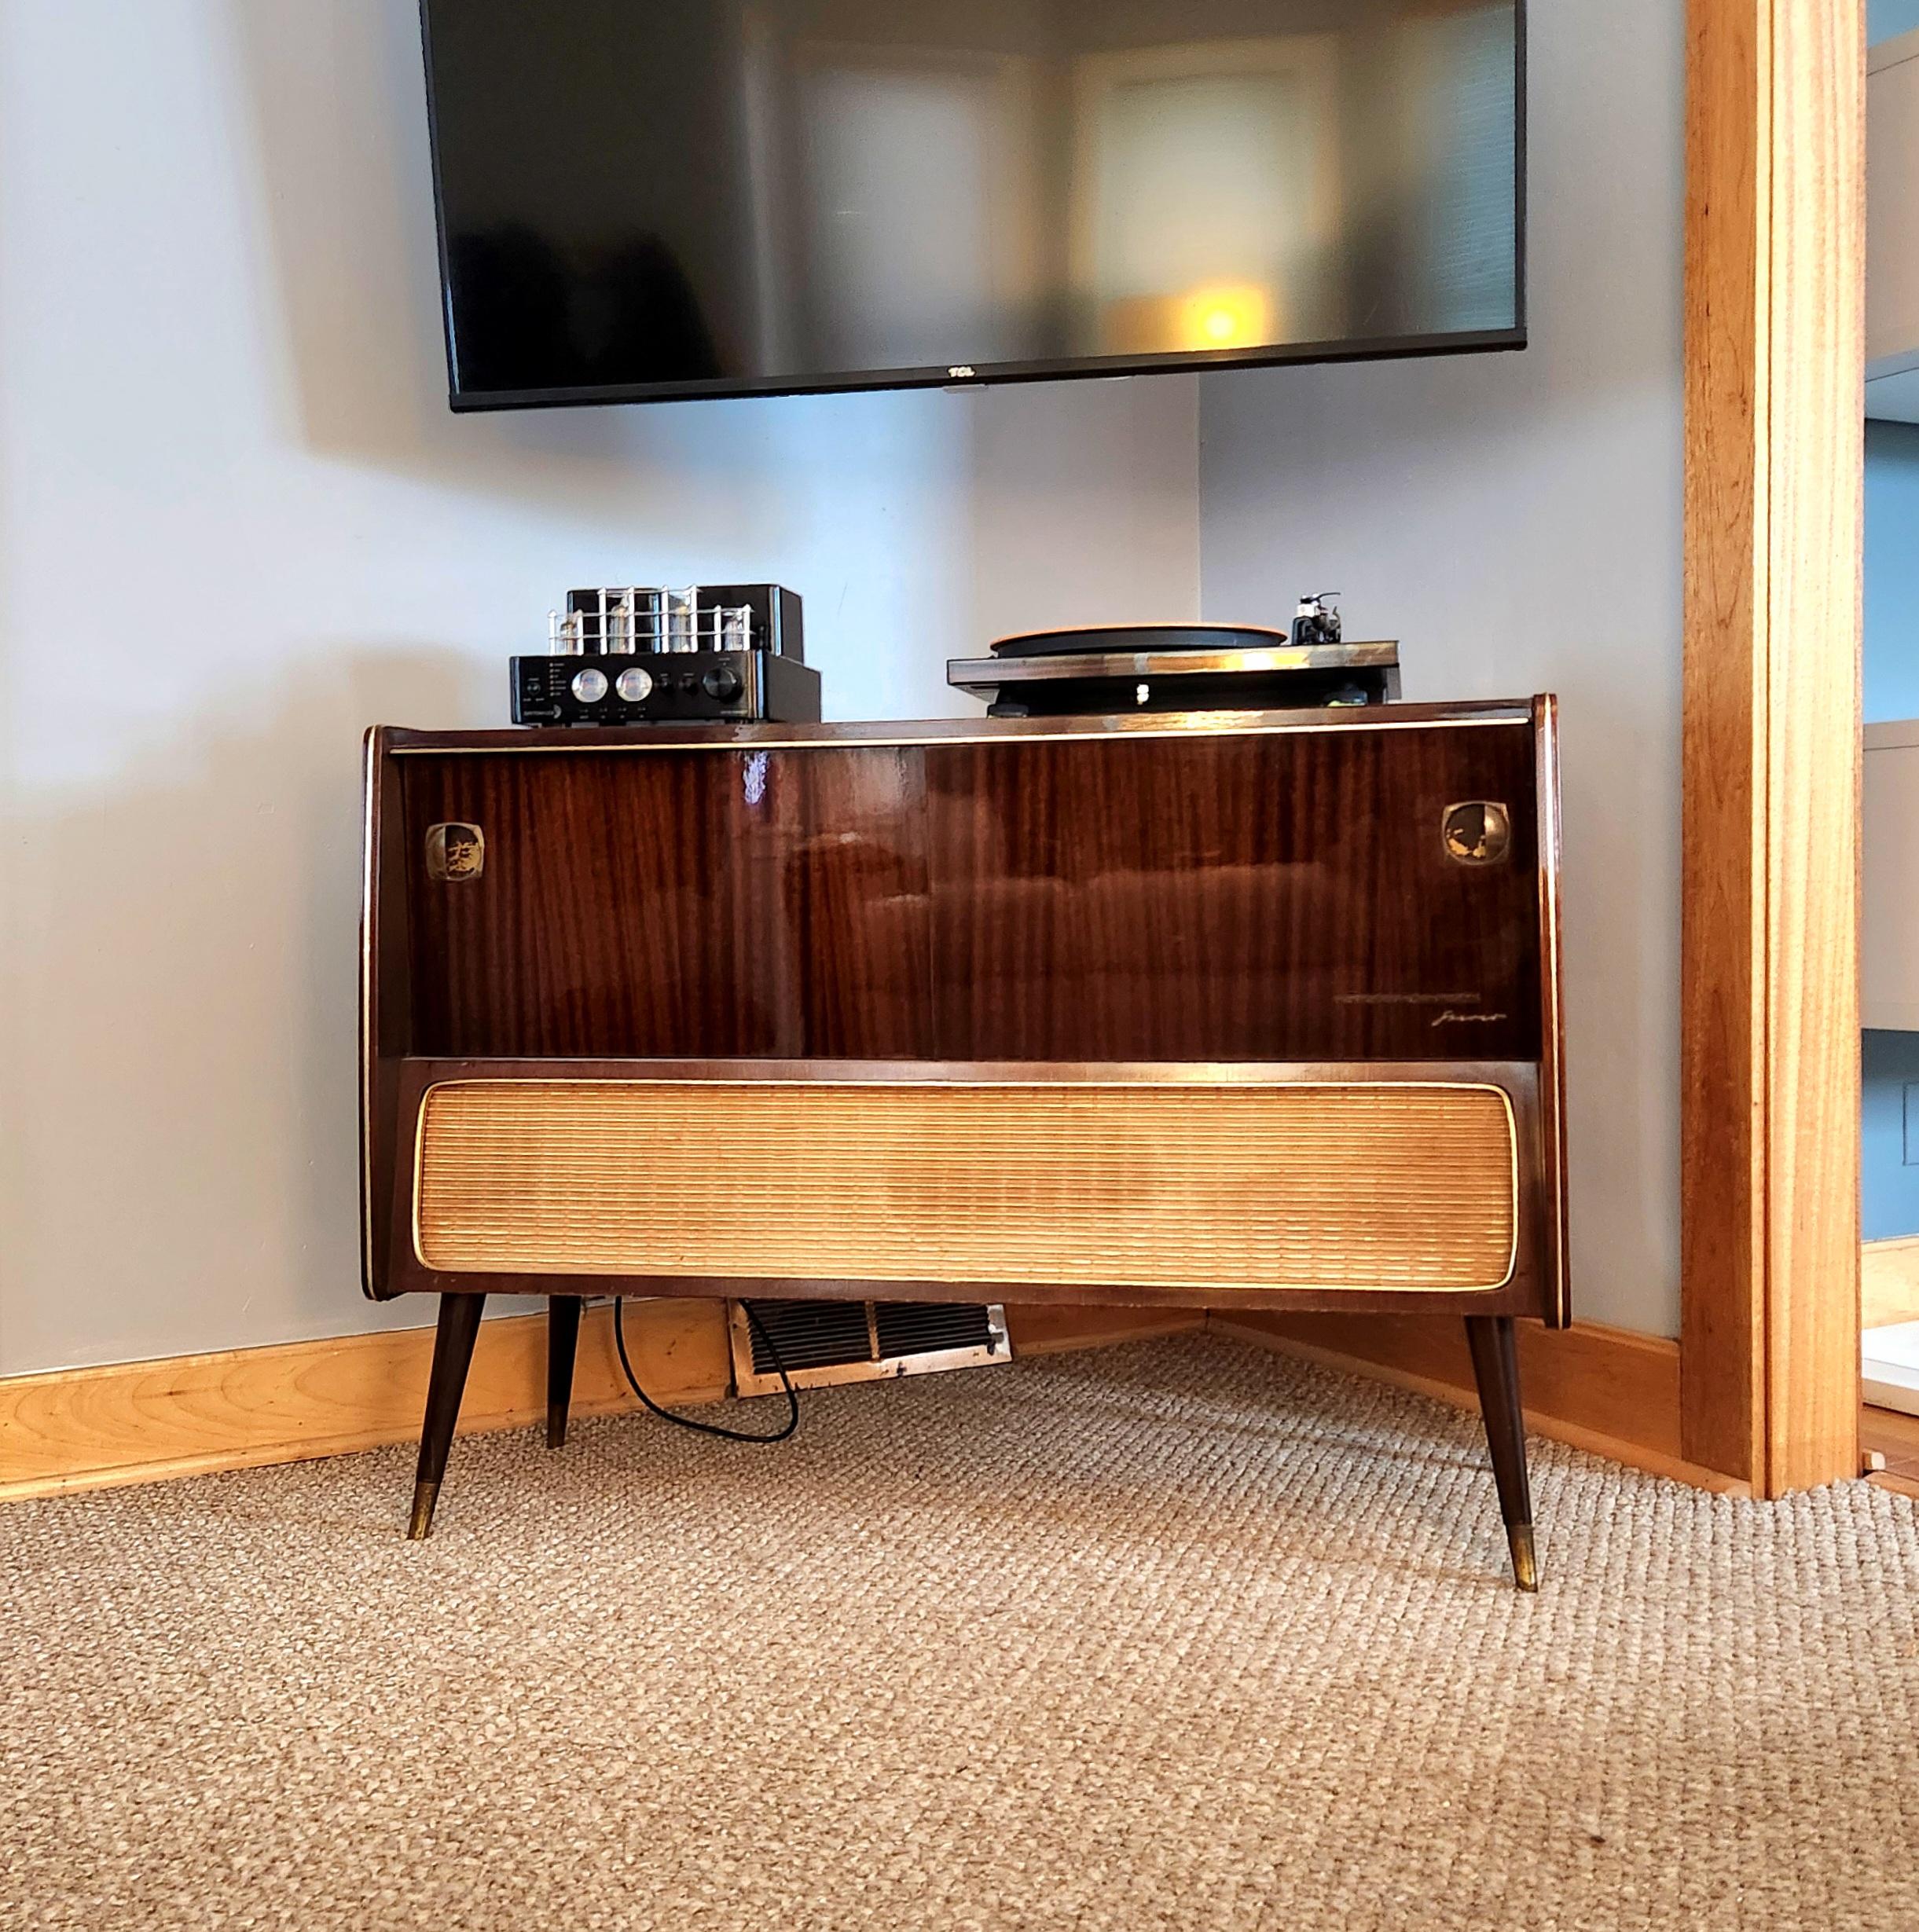 “If art decorates space… and music is the art that decorates time, then our vintage stereo consoles decorate lives by accentuating both.”  Groovy Wood Studios

This console:
This is a console refurbished by Groovy Wood Studios.  We acquire our